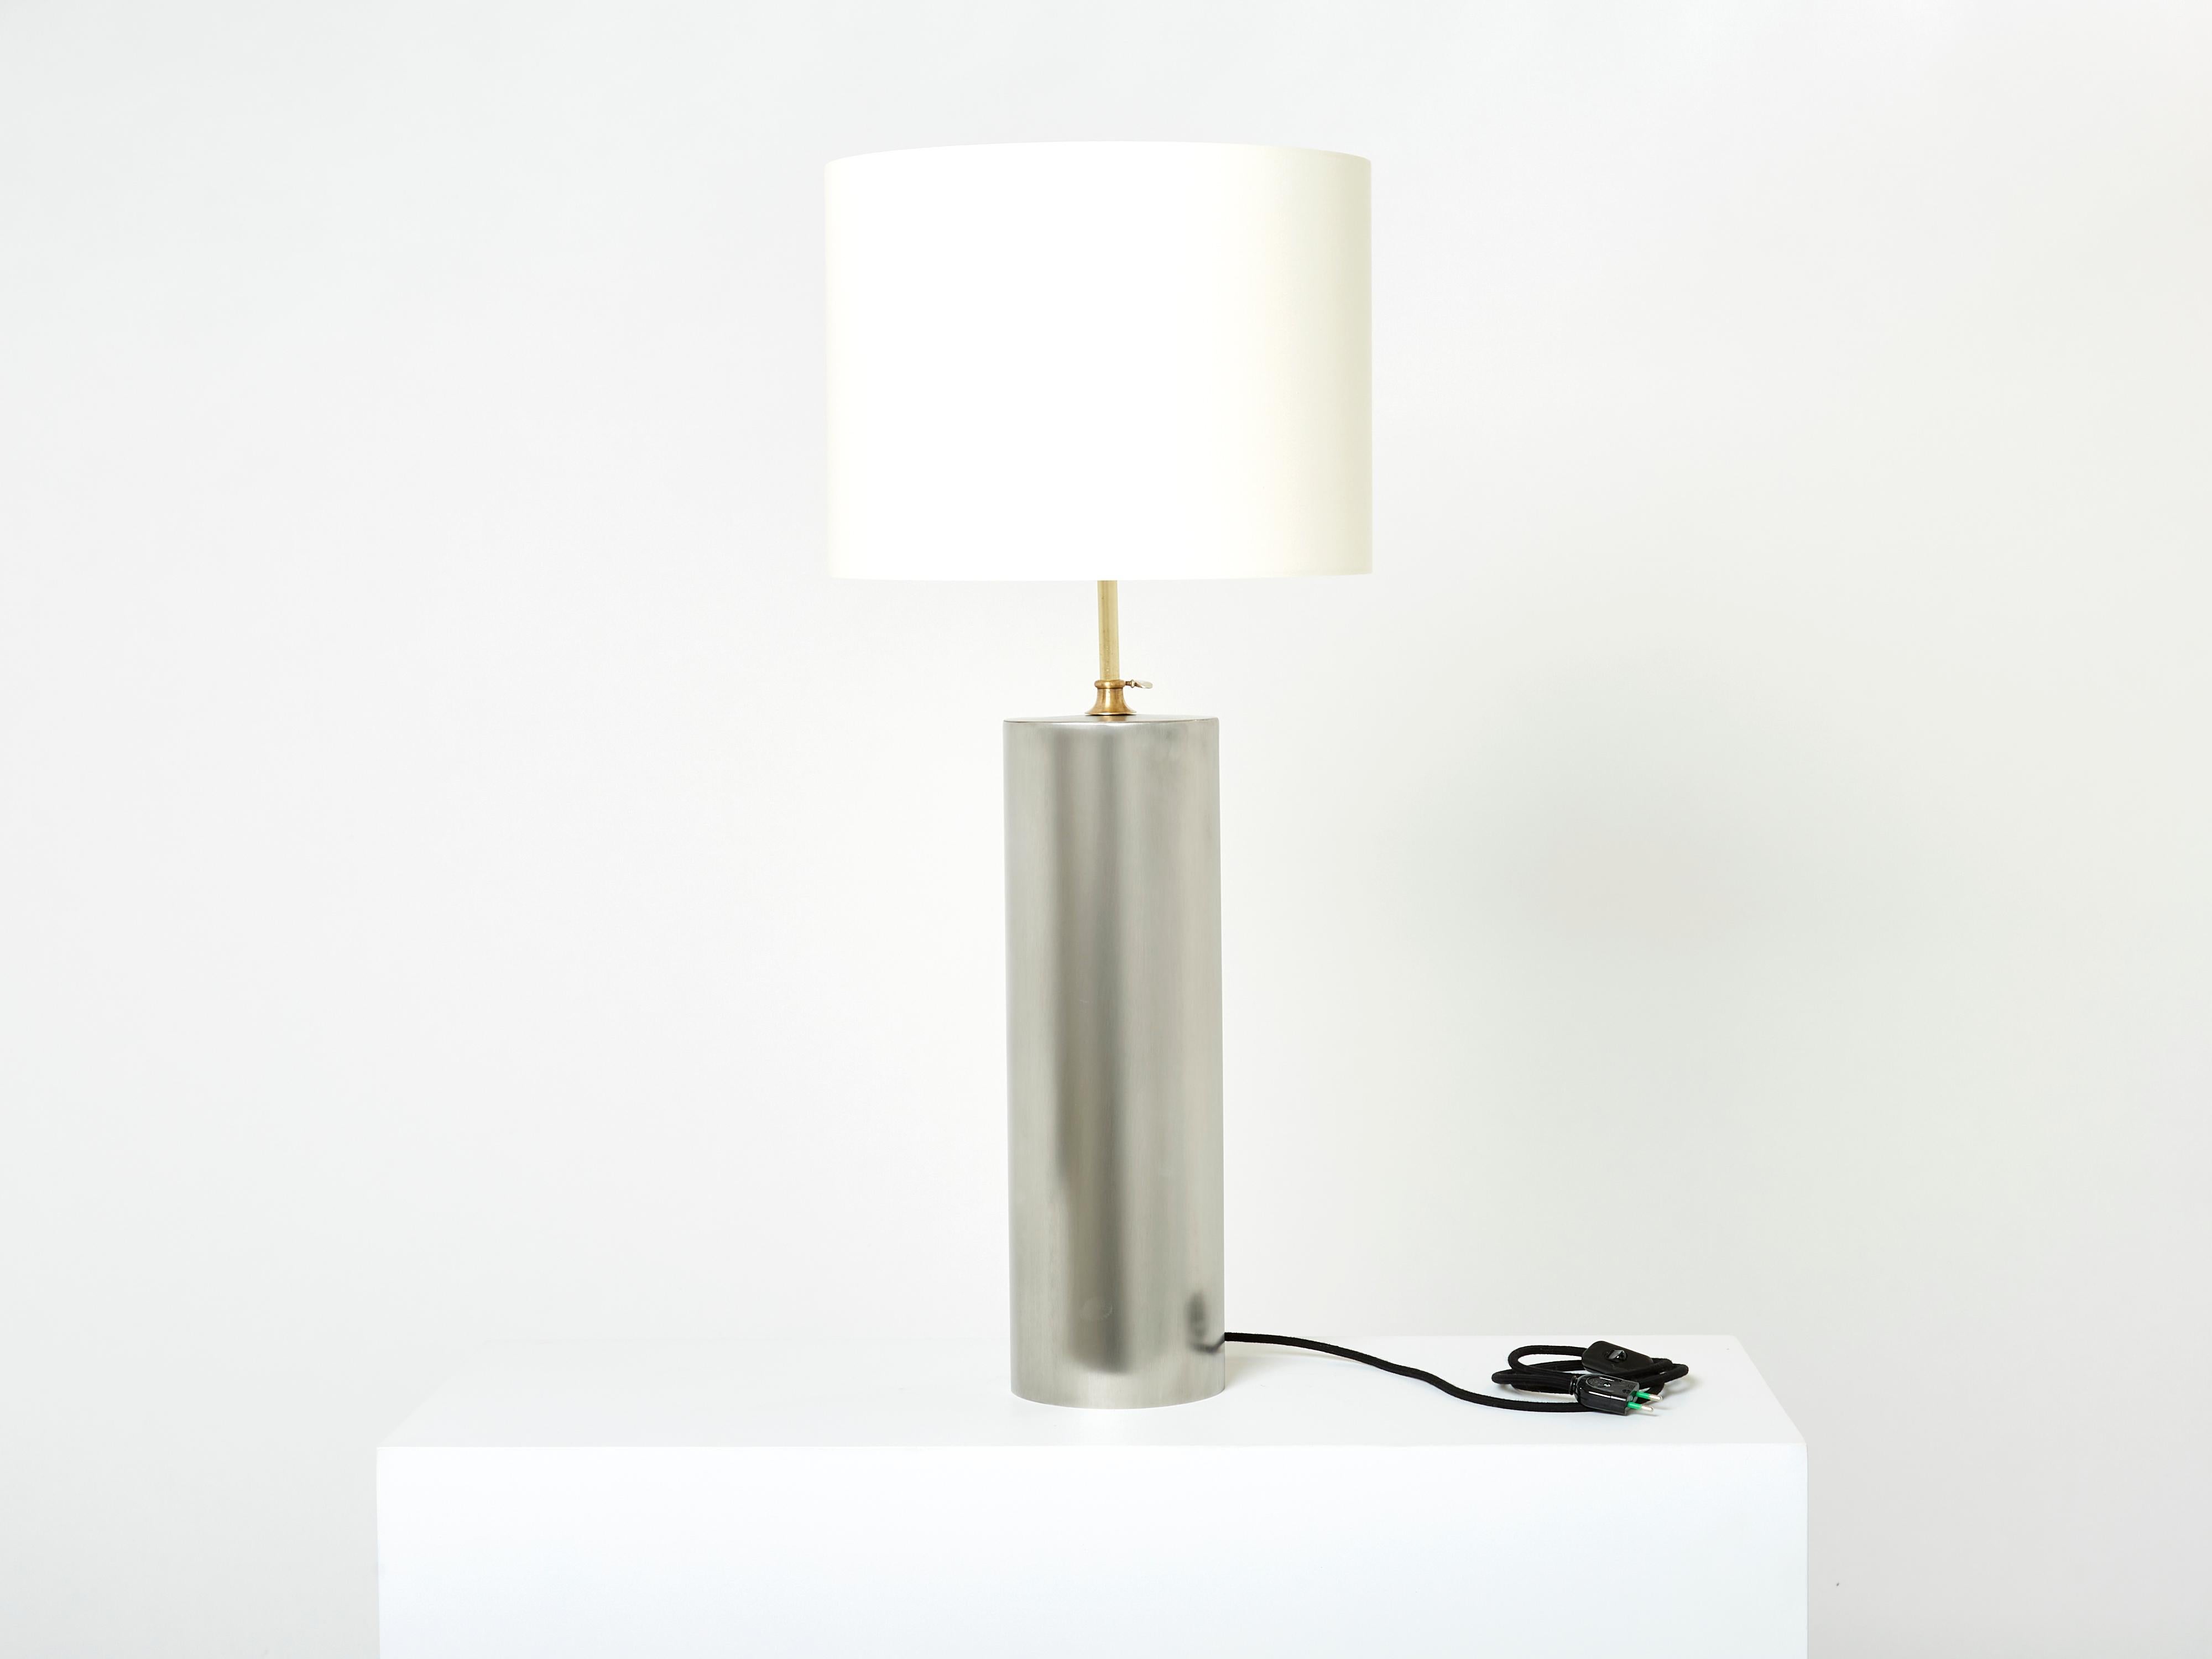 French Pair of Modernist Brushed Steel Lamps, 1966